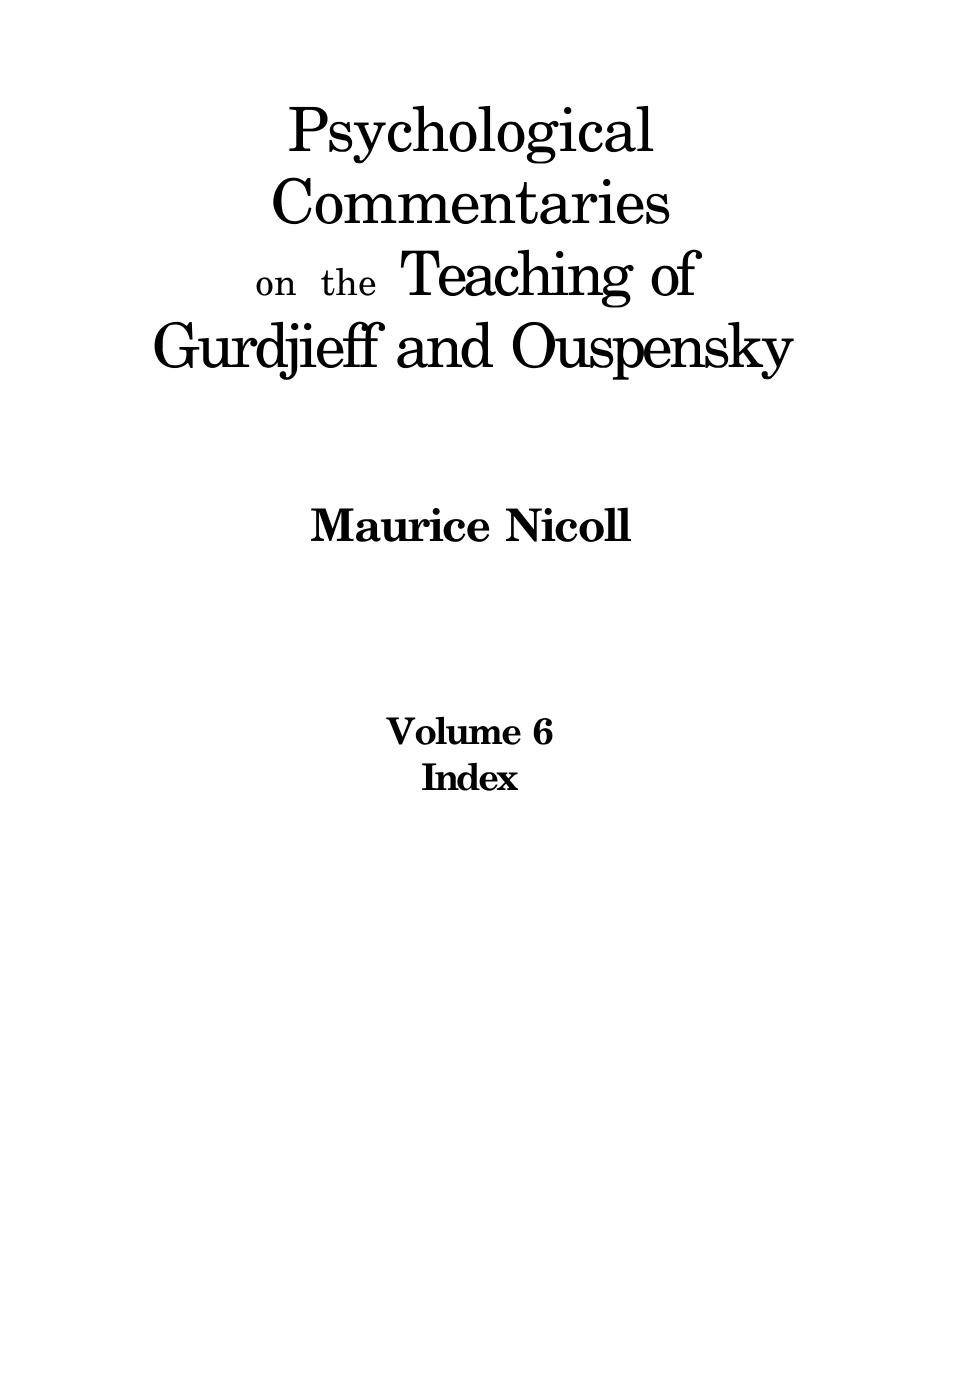 Psychological Commentaries on the Teaching of Gurdjieff and Ouspensky - Volume 6